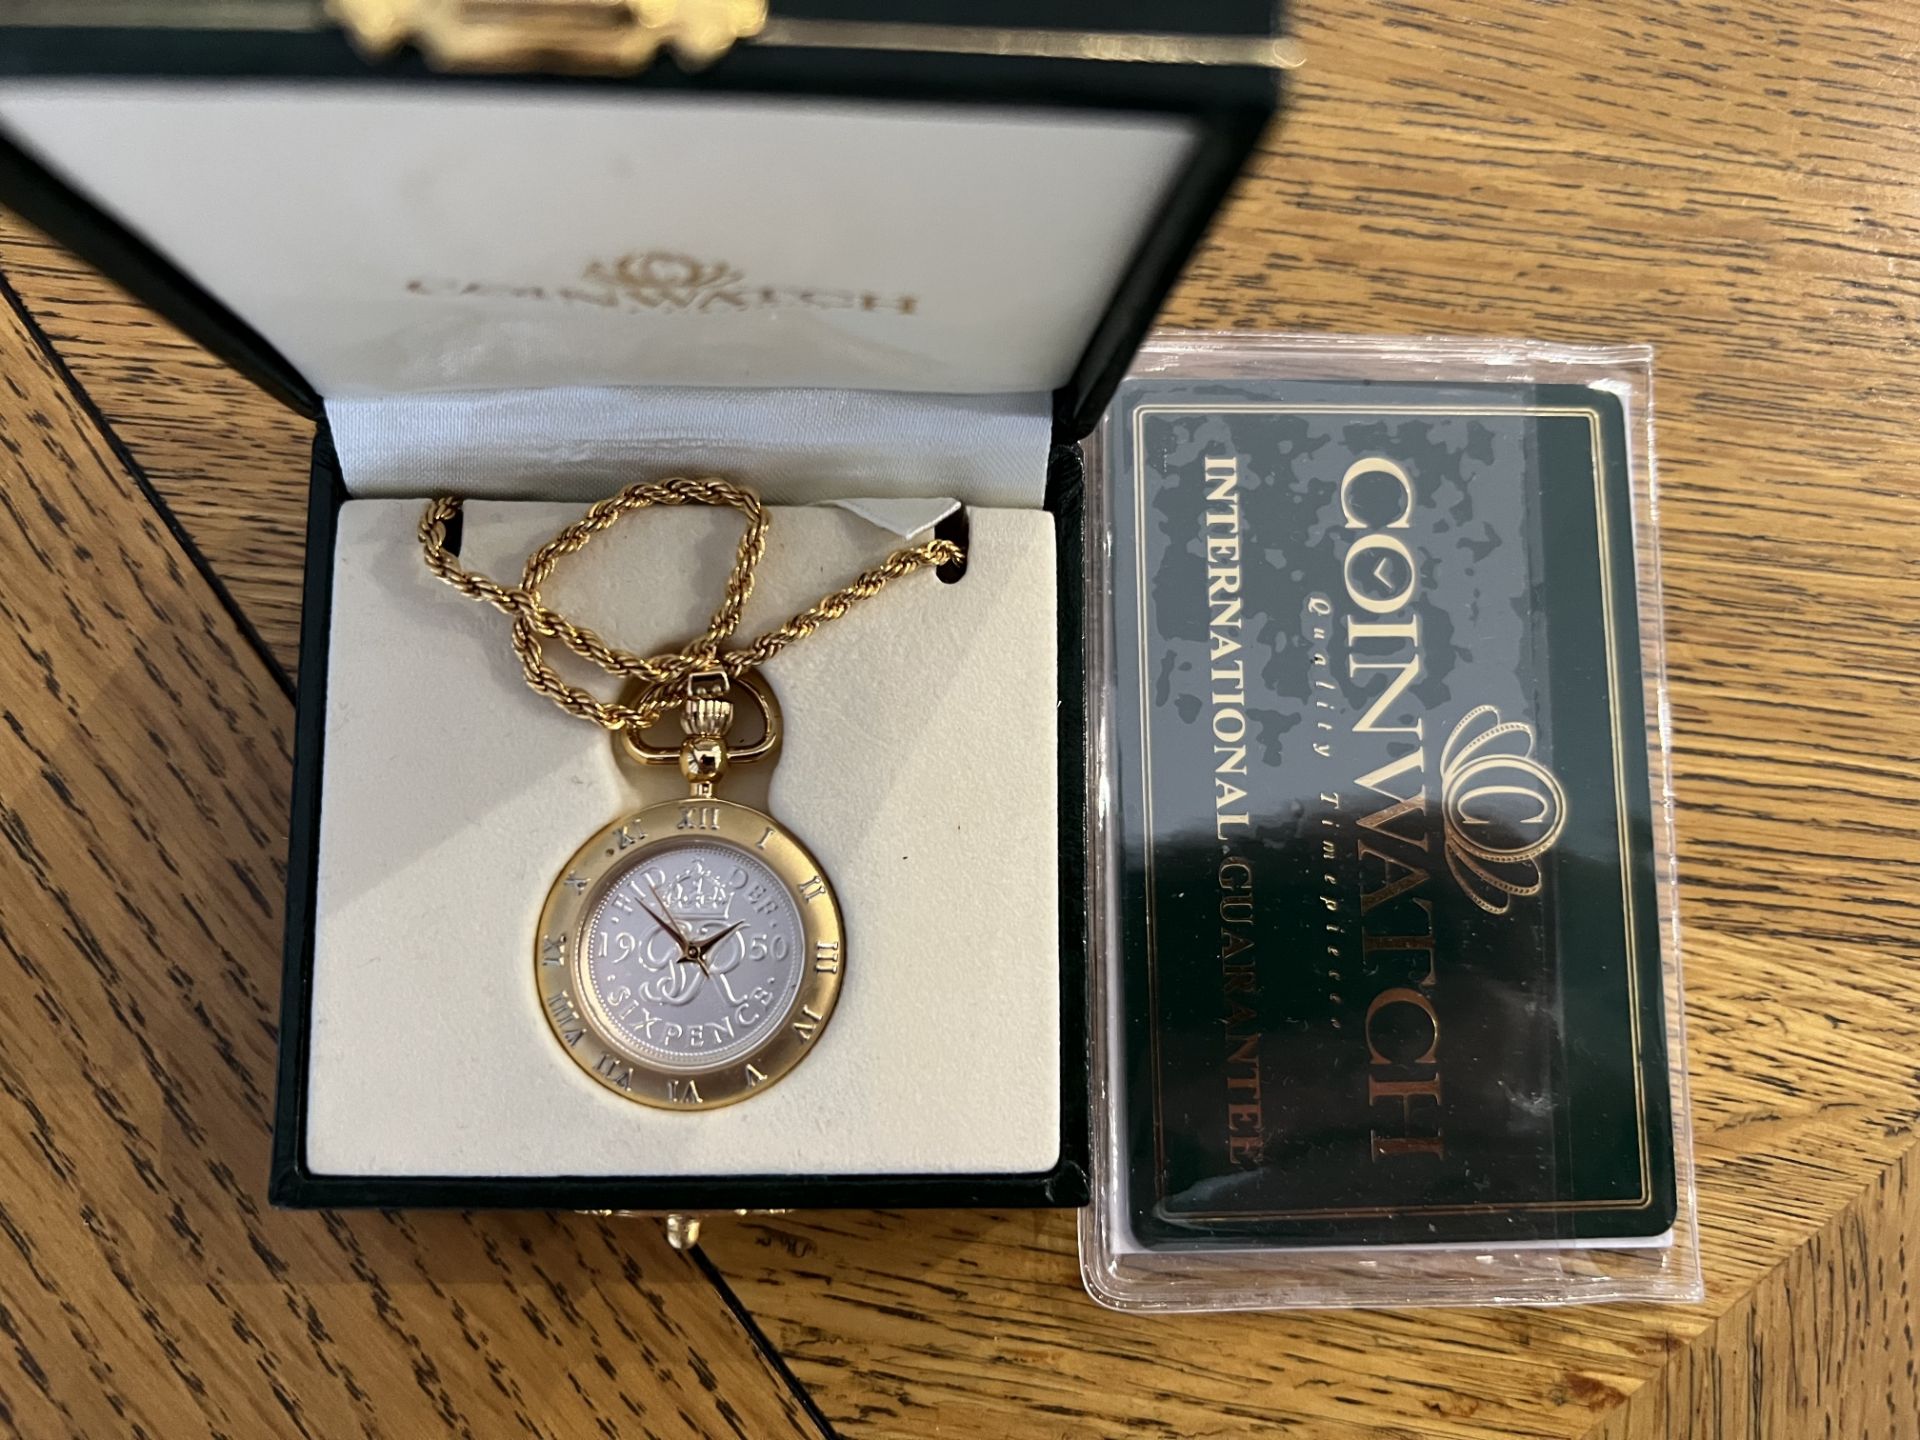 NEW COINWATCH IN BOX WITH GUARANTEE CARD